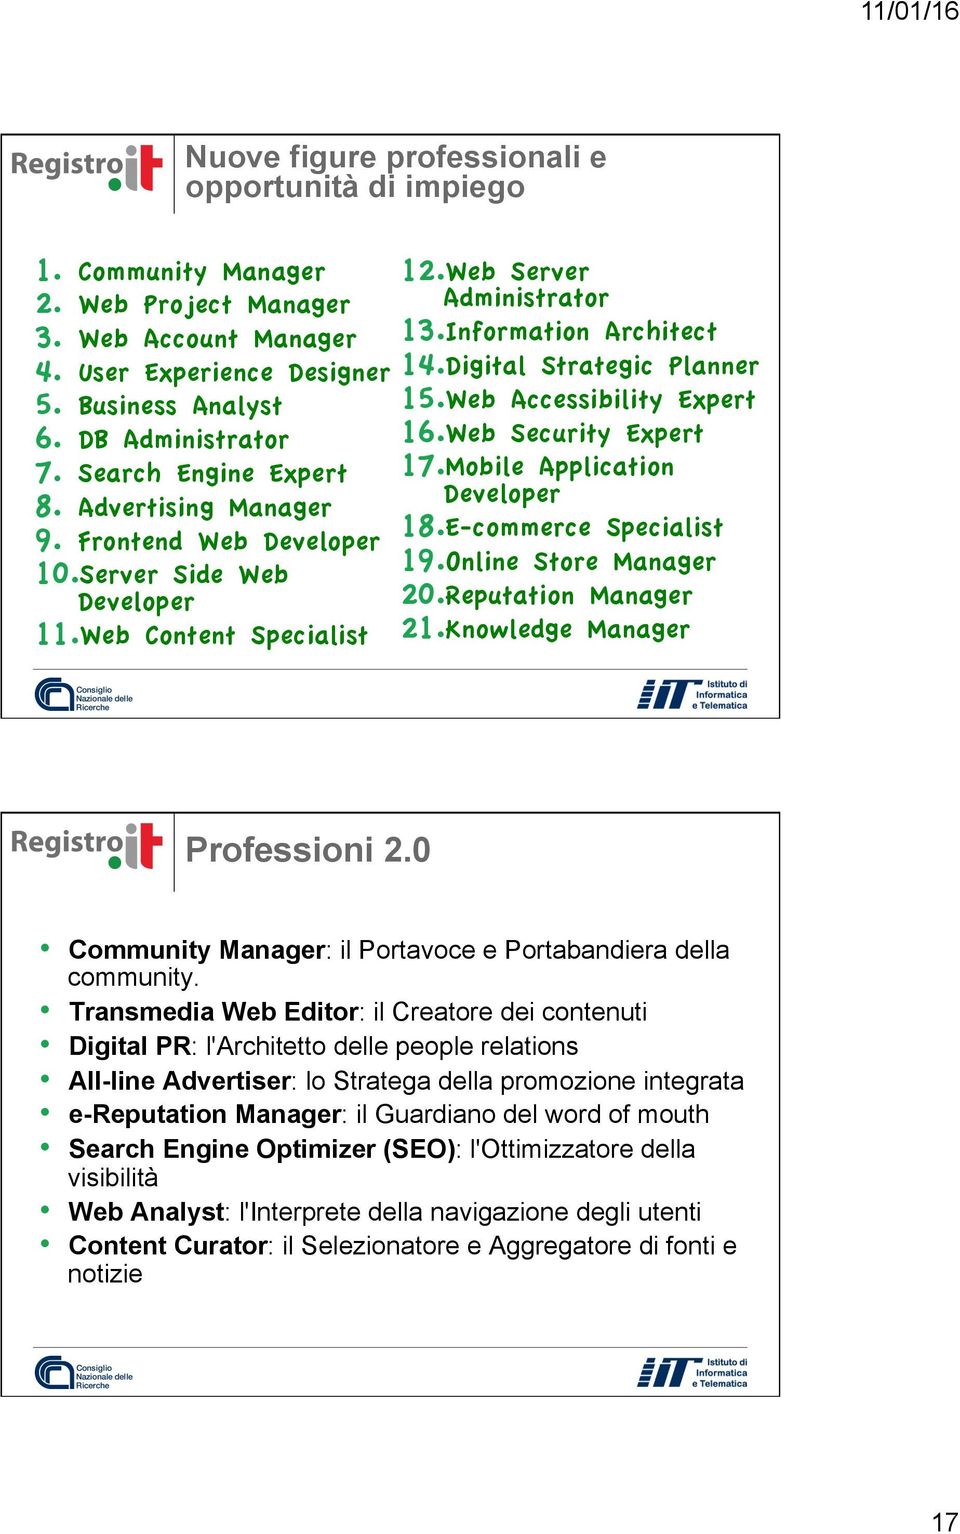 Digital Strategic Planner 15. Web Accessibility Expert 16. Web Security Expert 17. Mobile Application Developer 18. E-commerce Specialist 19. Online Store Manager 20. Reputation Manager 21.